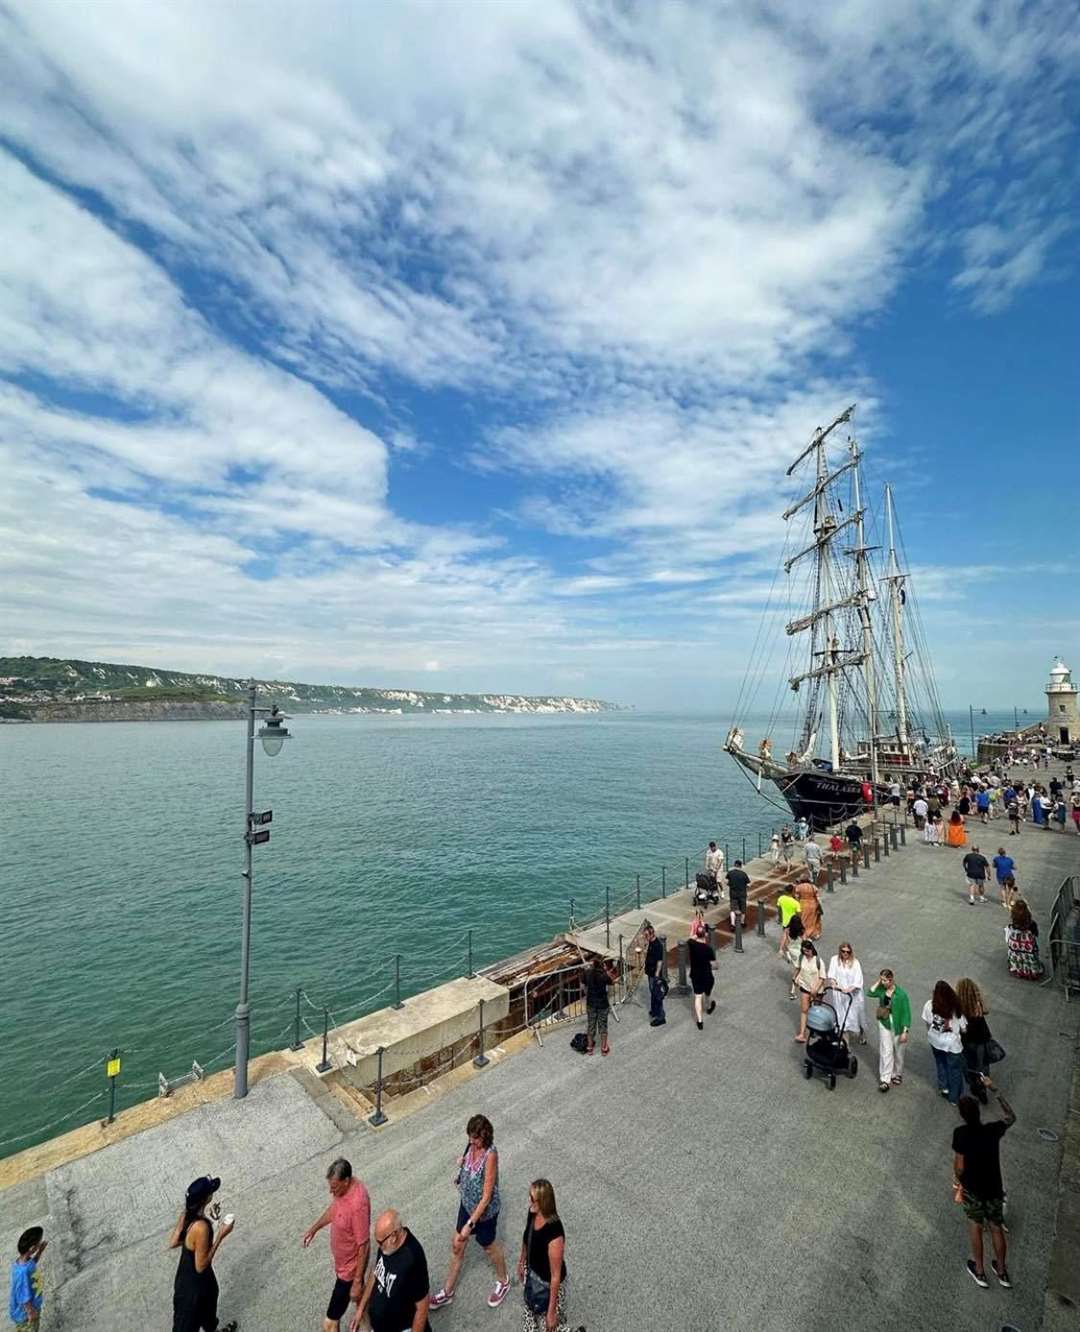 Tall Ship Thalassa arrived at Folkestone Harbour Arm this afternoon. Picture: Folkestone Harbour Arm